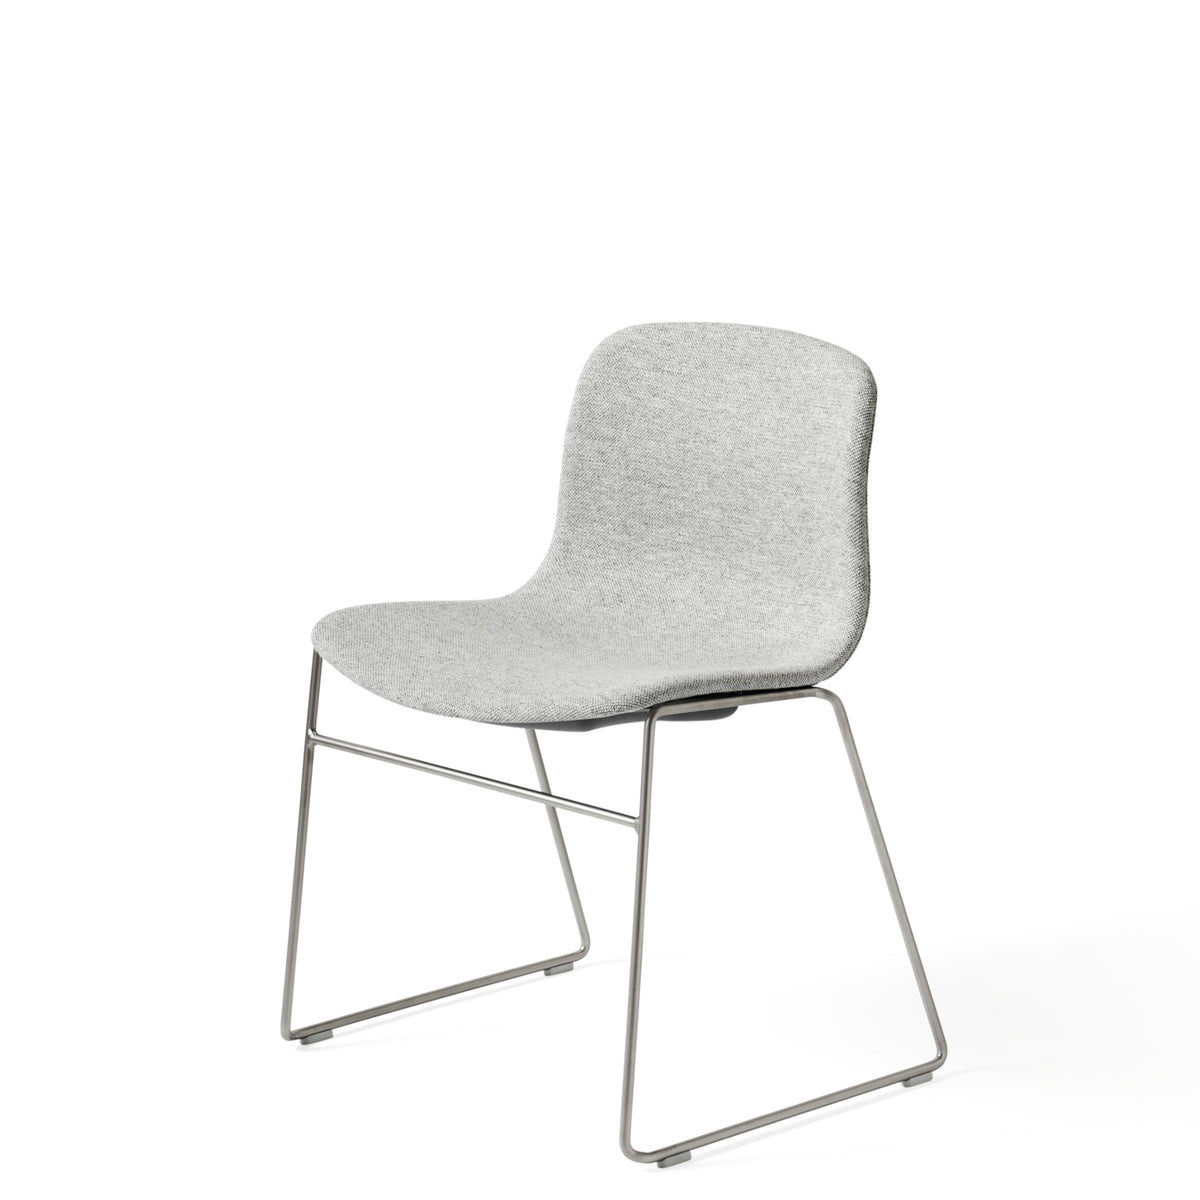 HAY About A Chair AAC 09 Stackable Chair, Stainless Steel Base